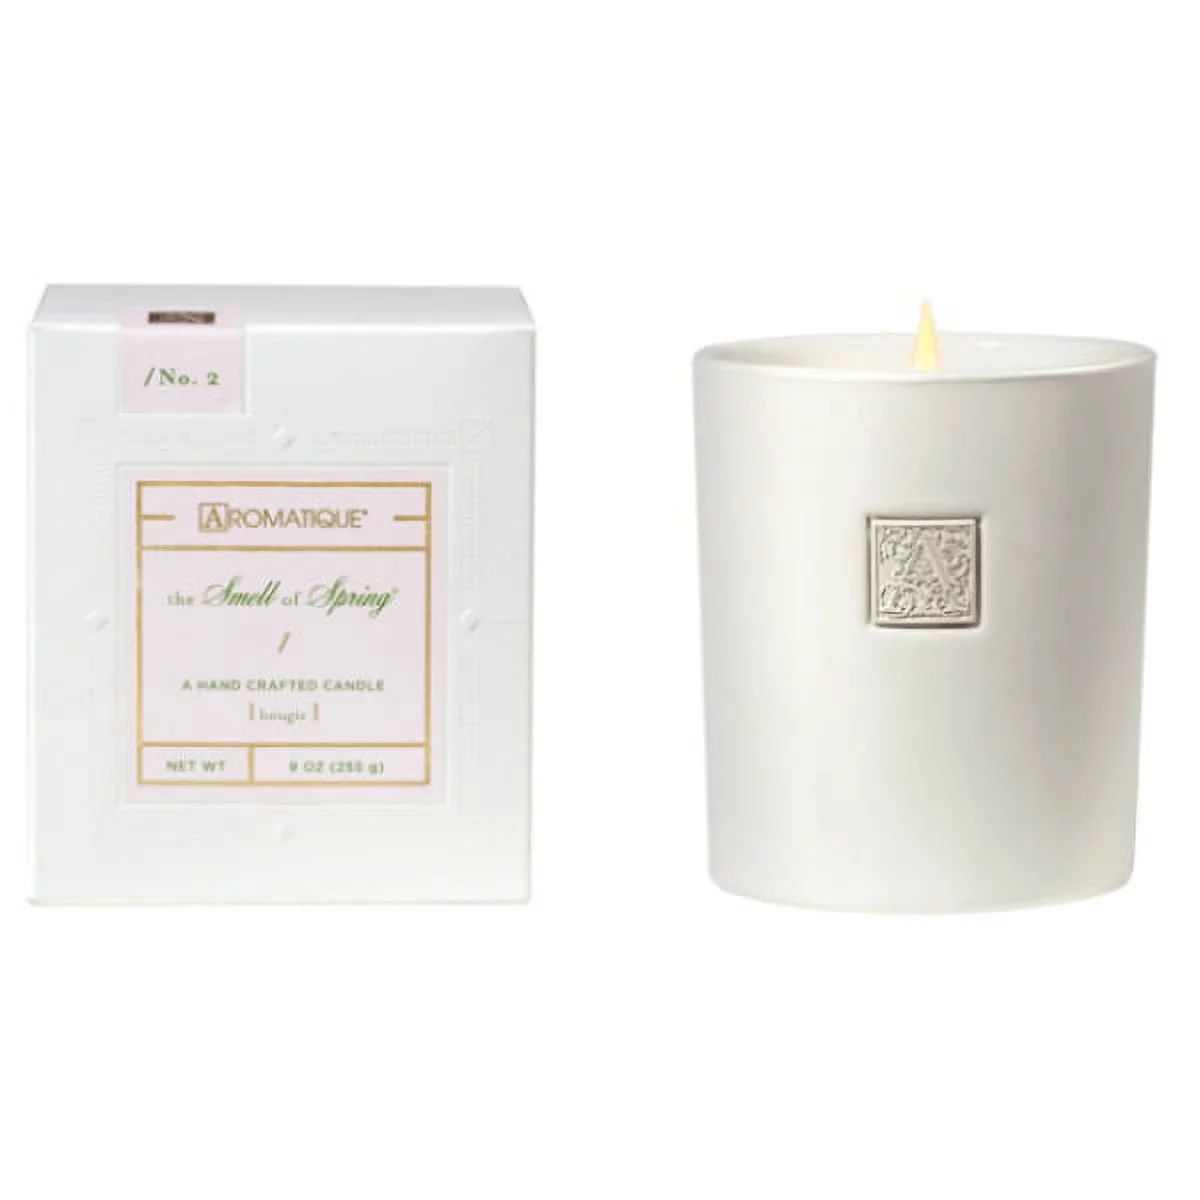 Aromatique The Smell of Spring Scented Candle 9oz | Walmart (US)